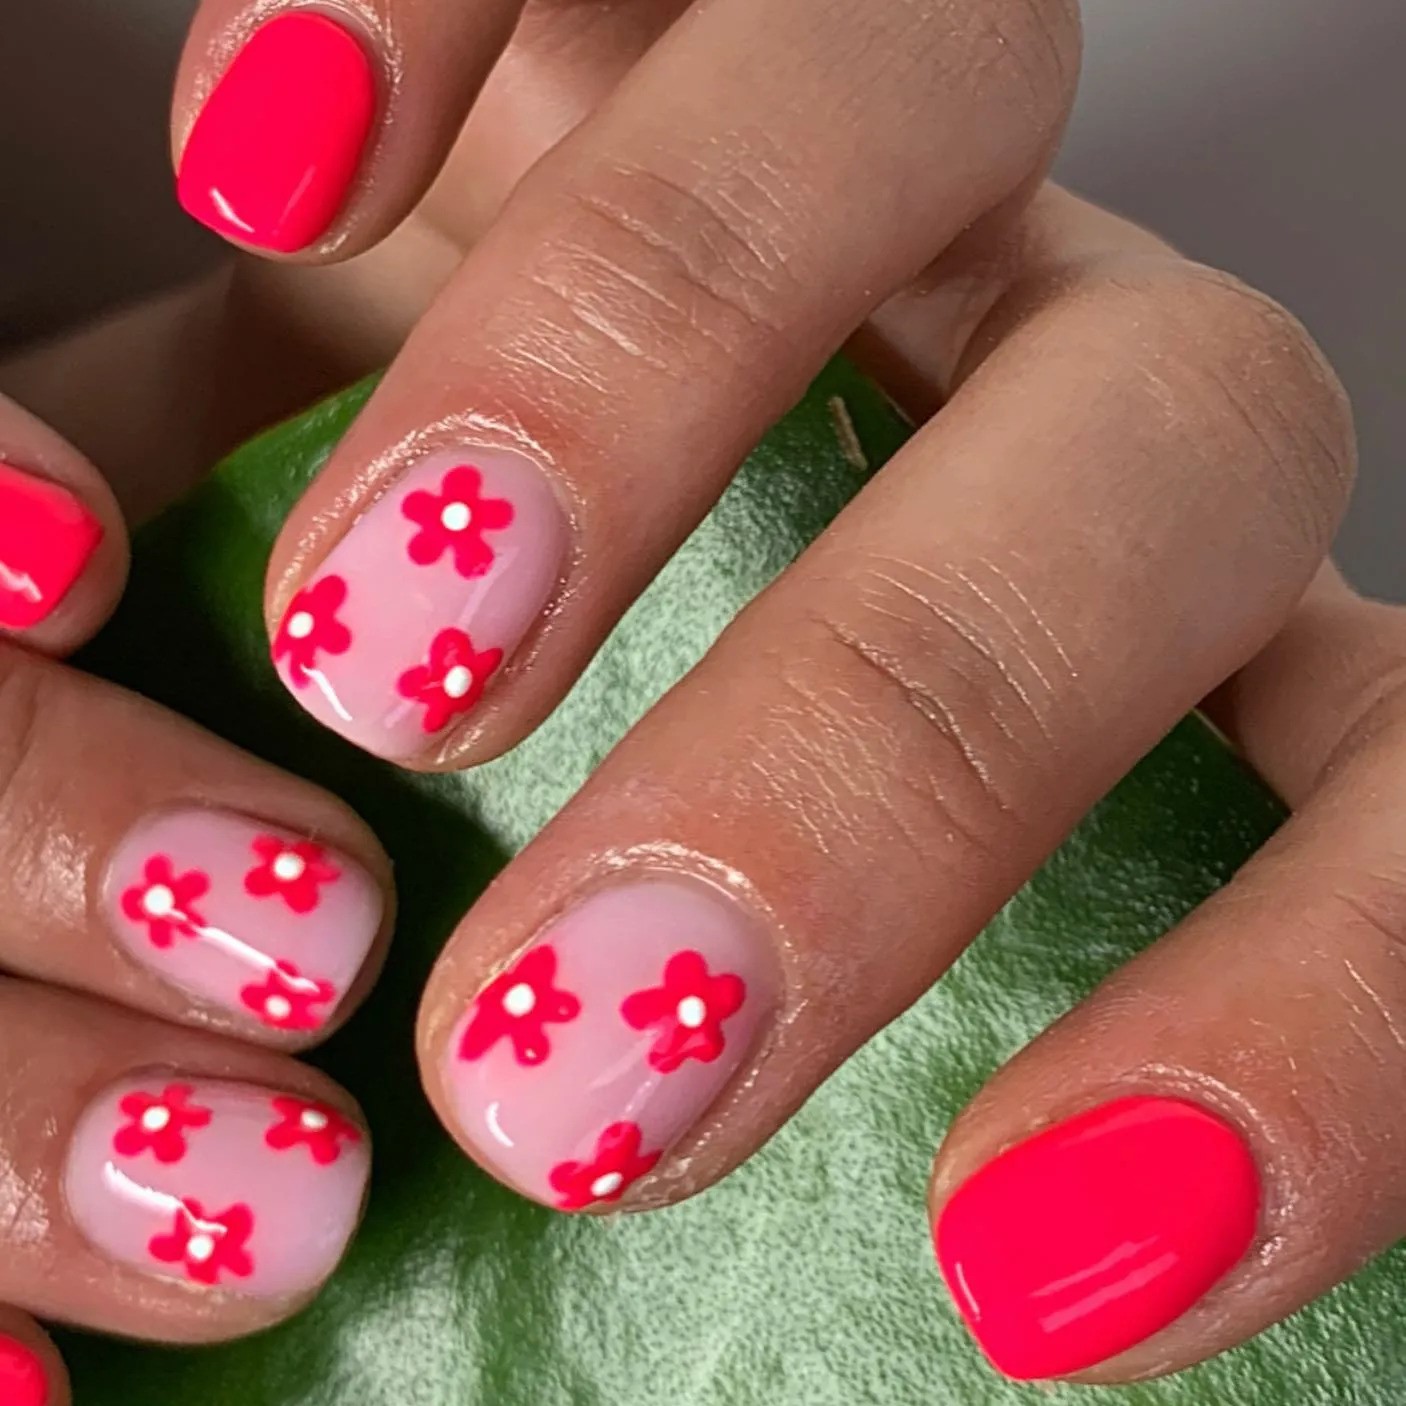 25 Delicate Flower Nail Designs Adding Lovely Blooms To Your Fingertips! | Flower  nail designs, Flower nails, Floral nails